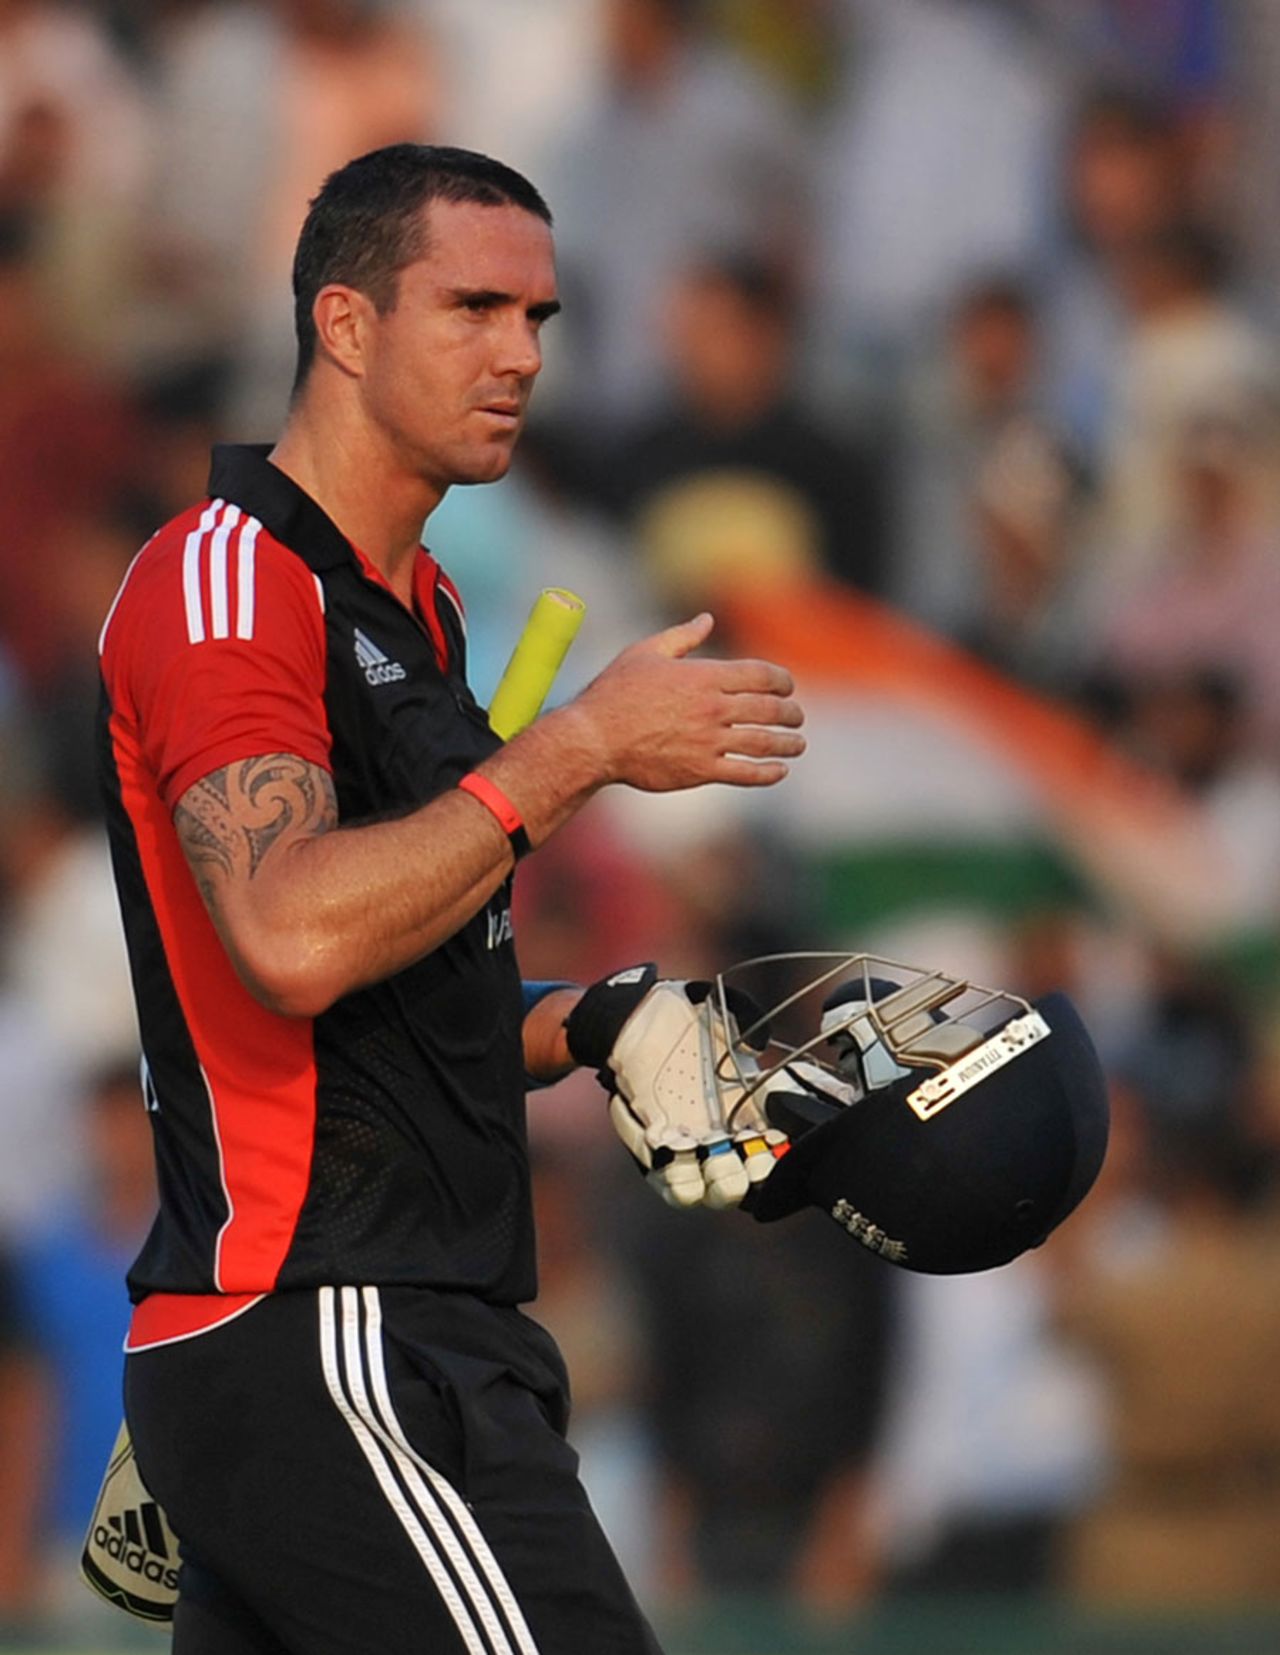 Kevin Pietersen was frustrated to be given out lbw, India v England, 3rd ODI, Mohali, October 20, 2011